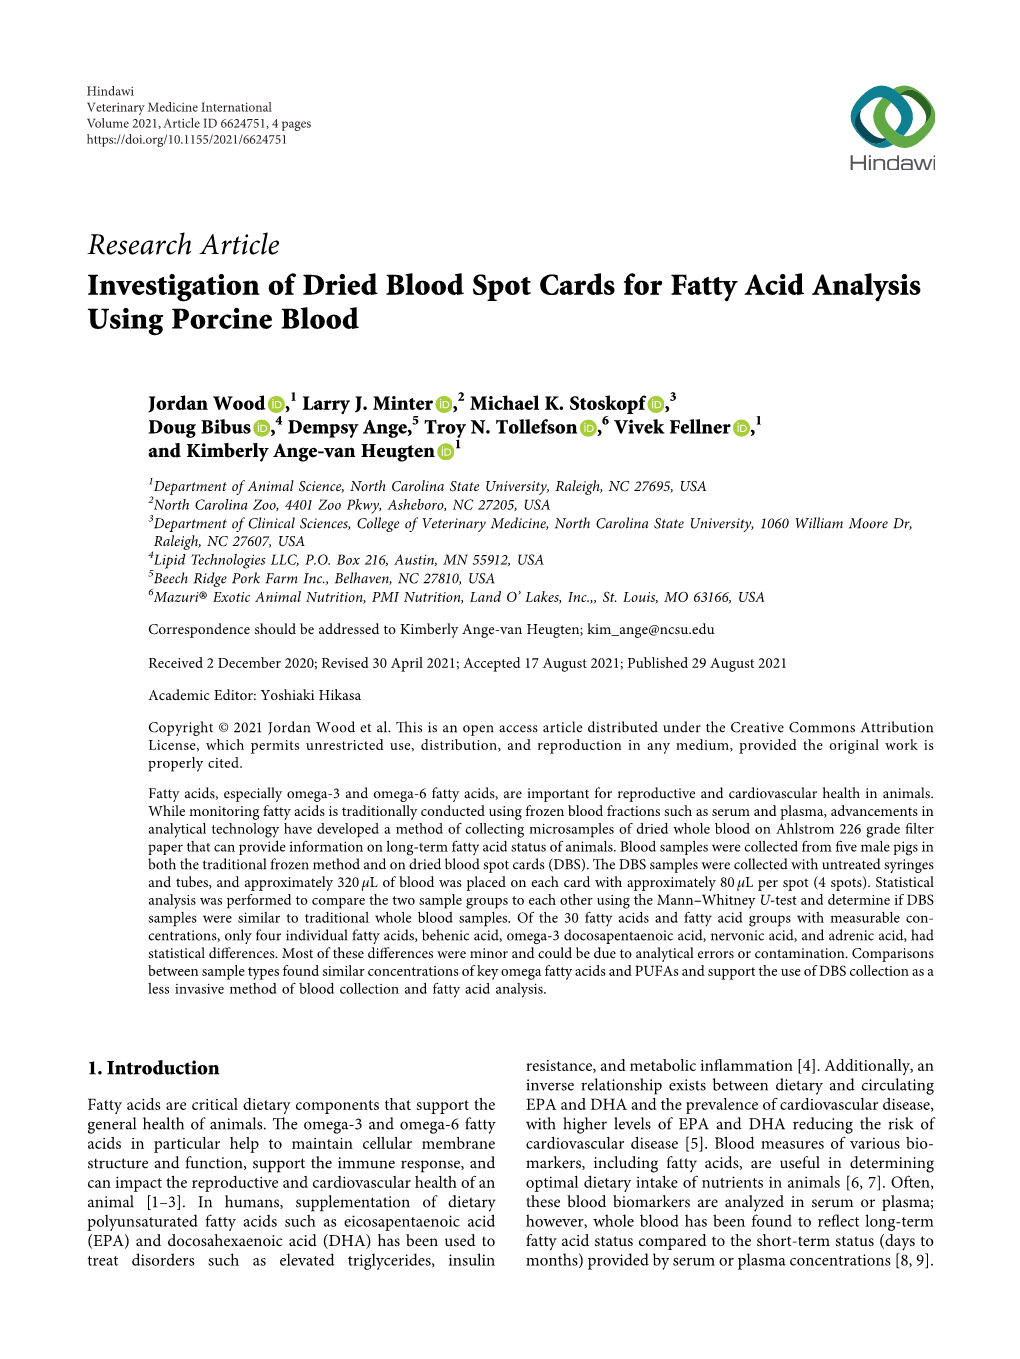 Research Article Investigation of Dried Blood Spot Cards for Fatty Acid Analysis Using Porcine Blood